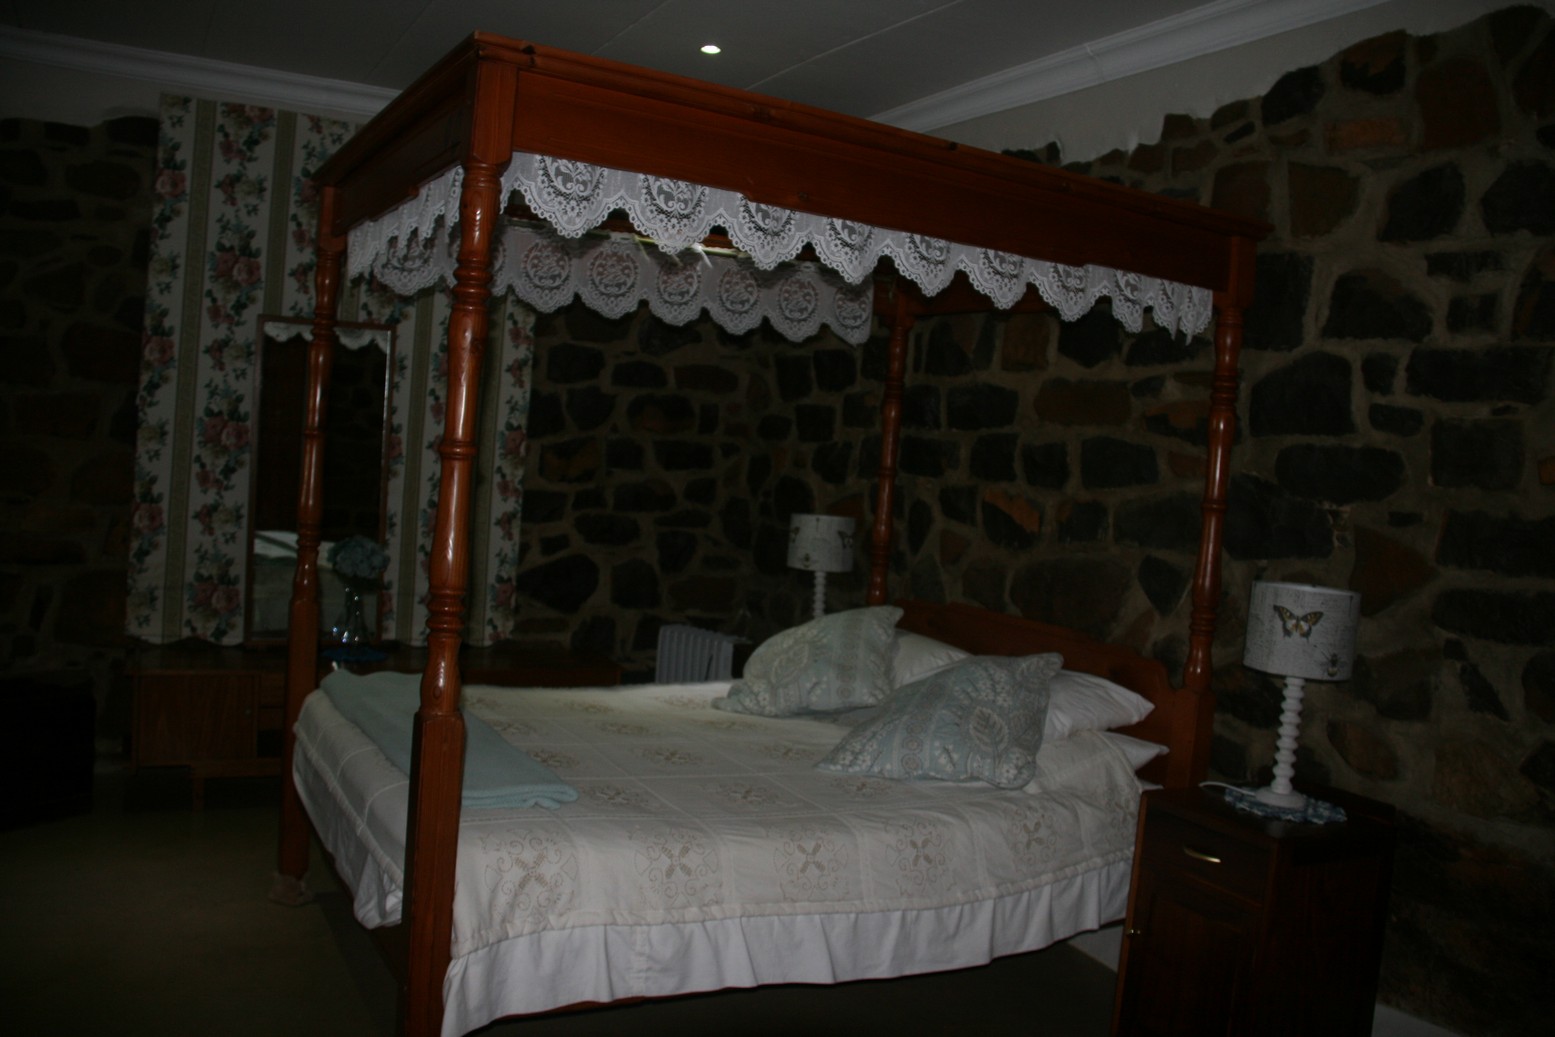 Guest Houses to rent in Bergville, Northern and Central Drakensberg Mountains, South Africa